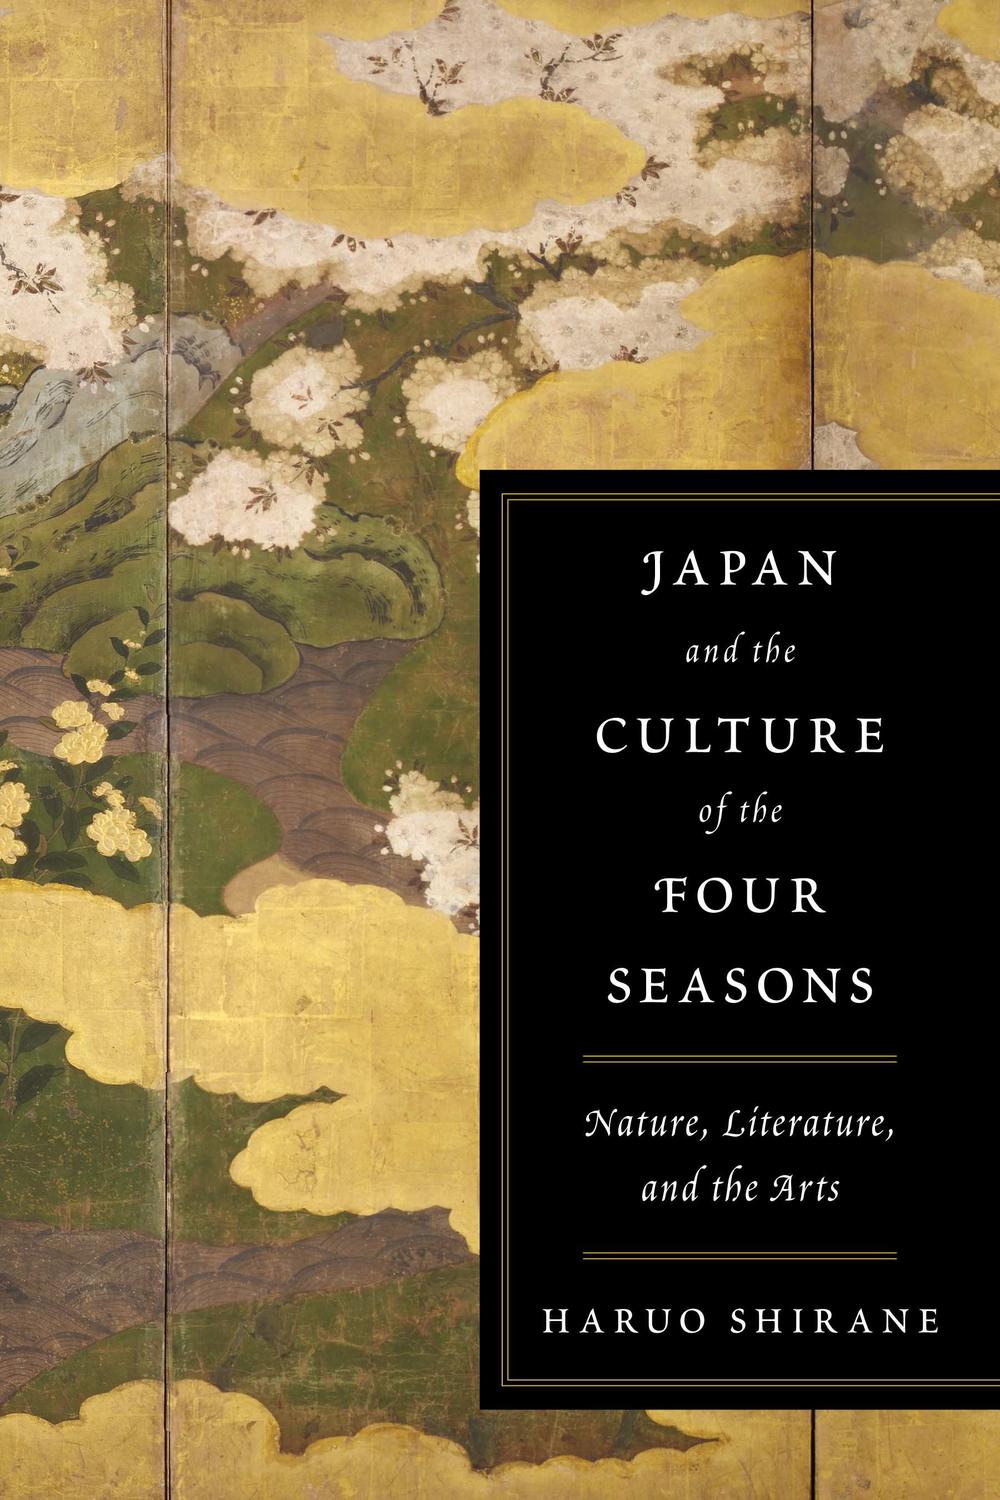 Japan and the Culture of the Four Seasons - Haruo Shirane